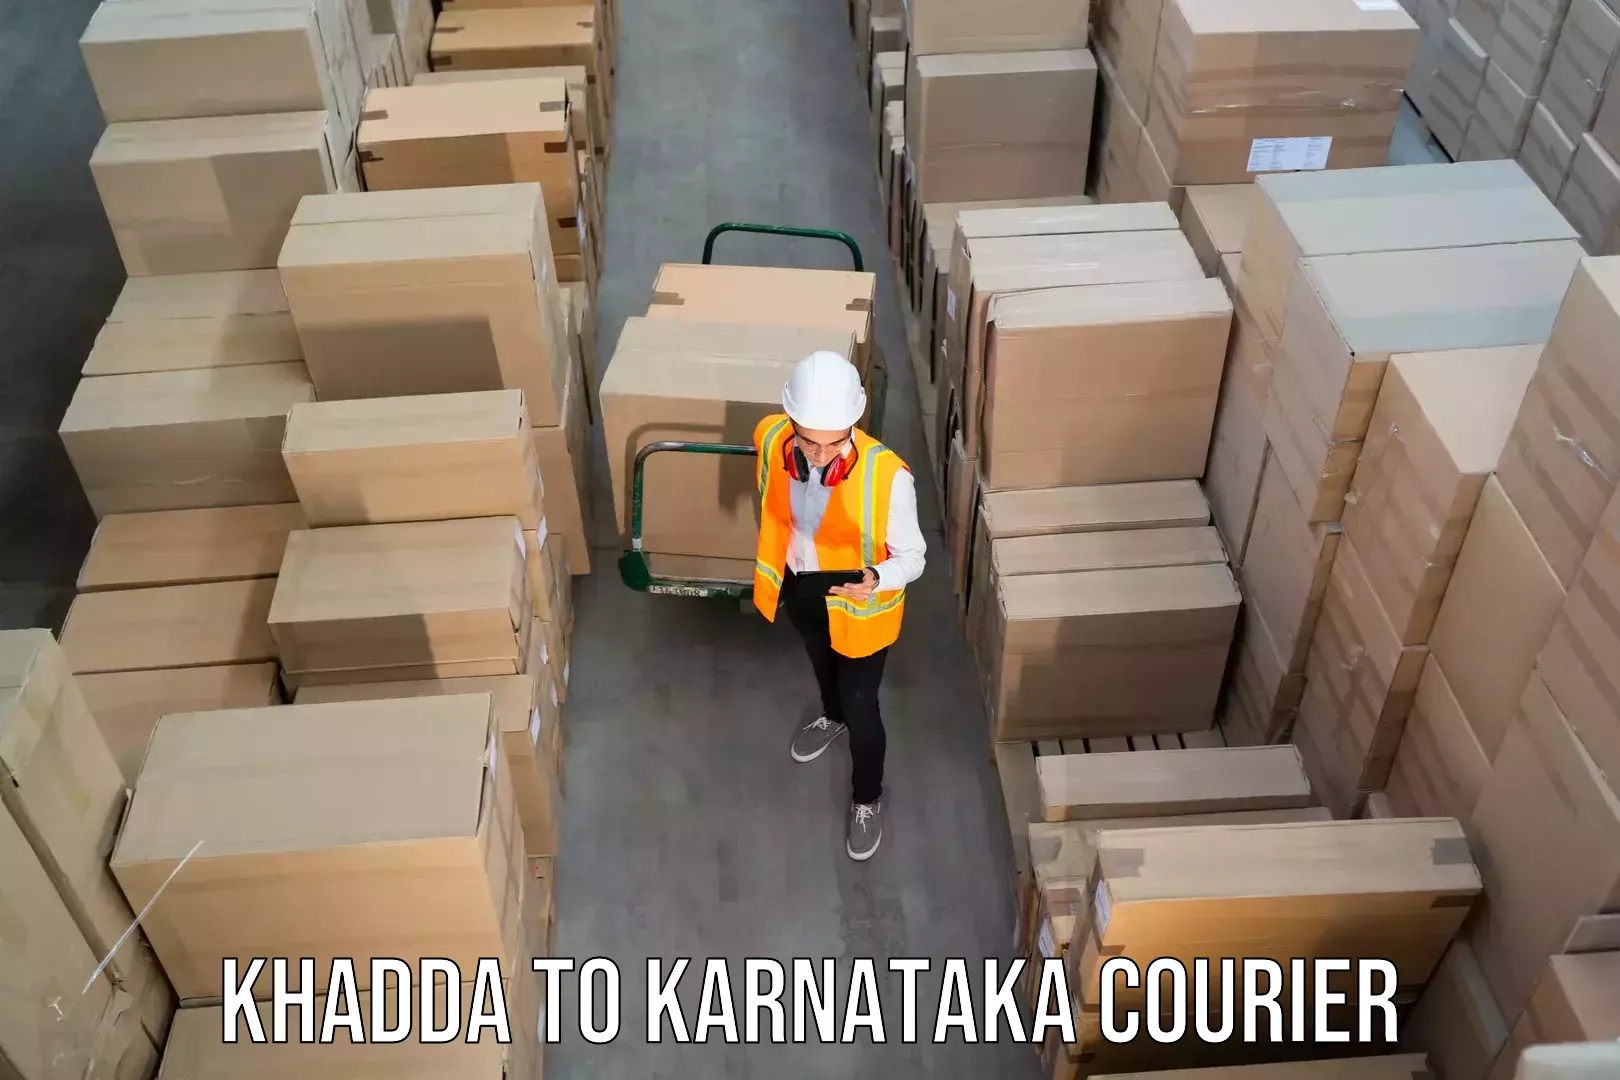 On-call courier service Khadda to Sirsi